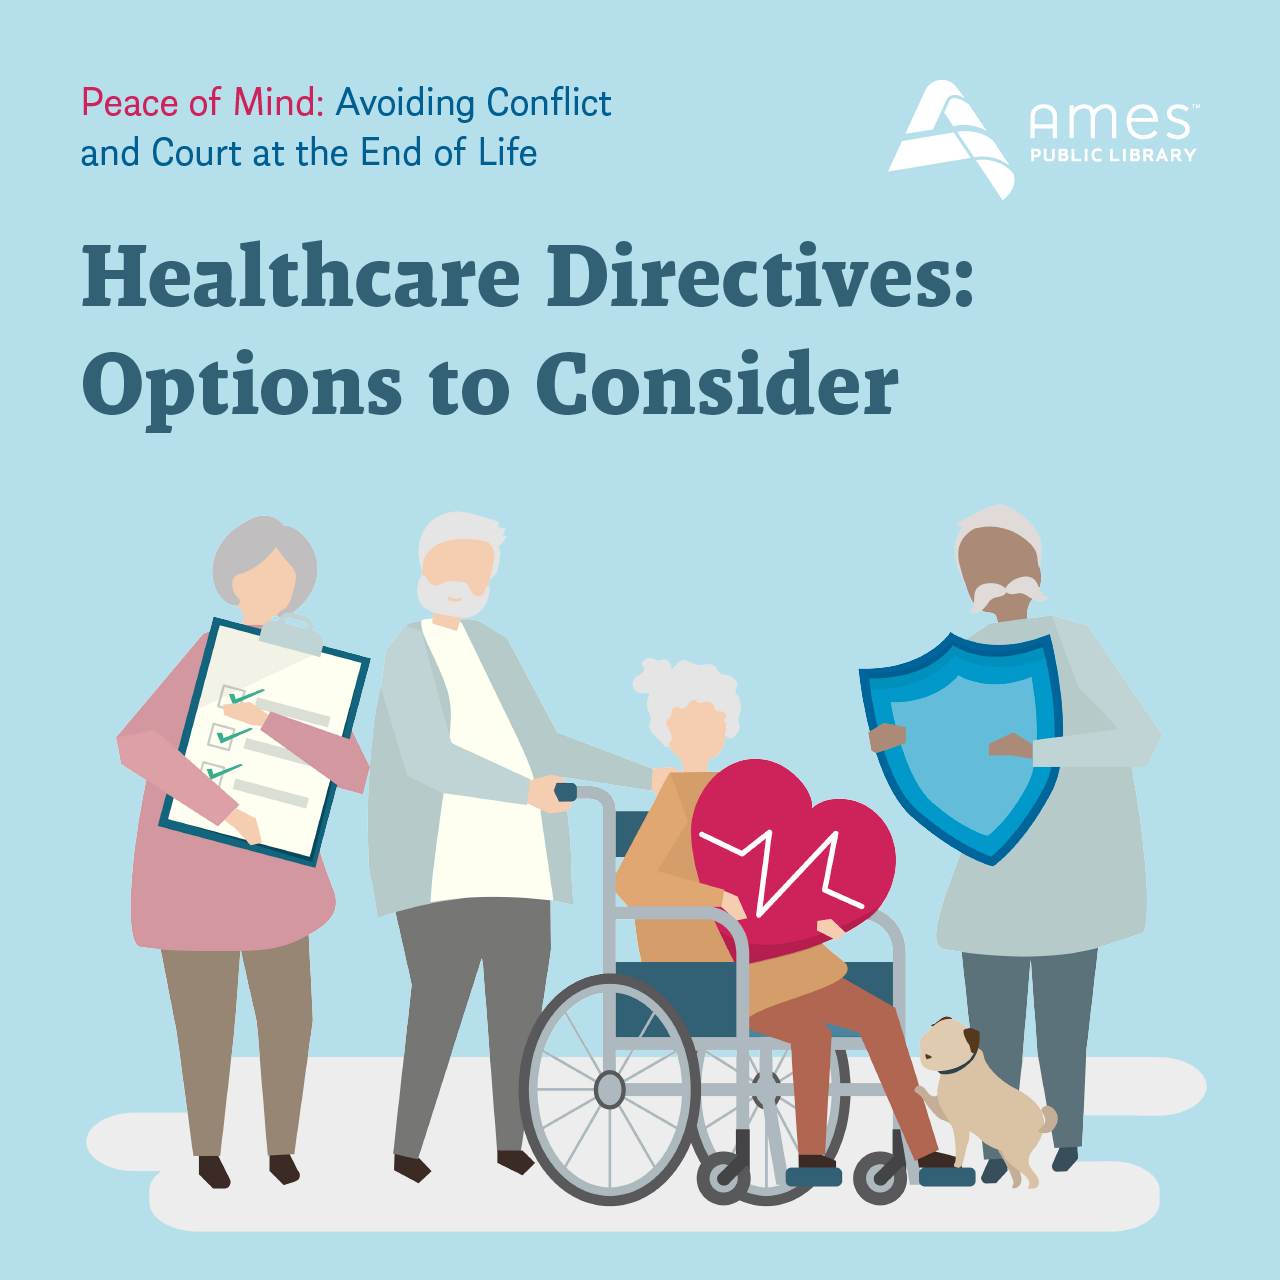 Peace of Mind: Avoiding Conflict & Court at the End of Life. Healthcare Directives: Options to Consider